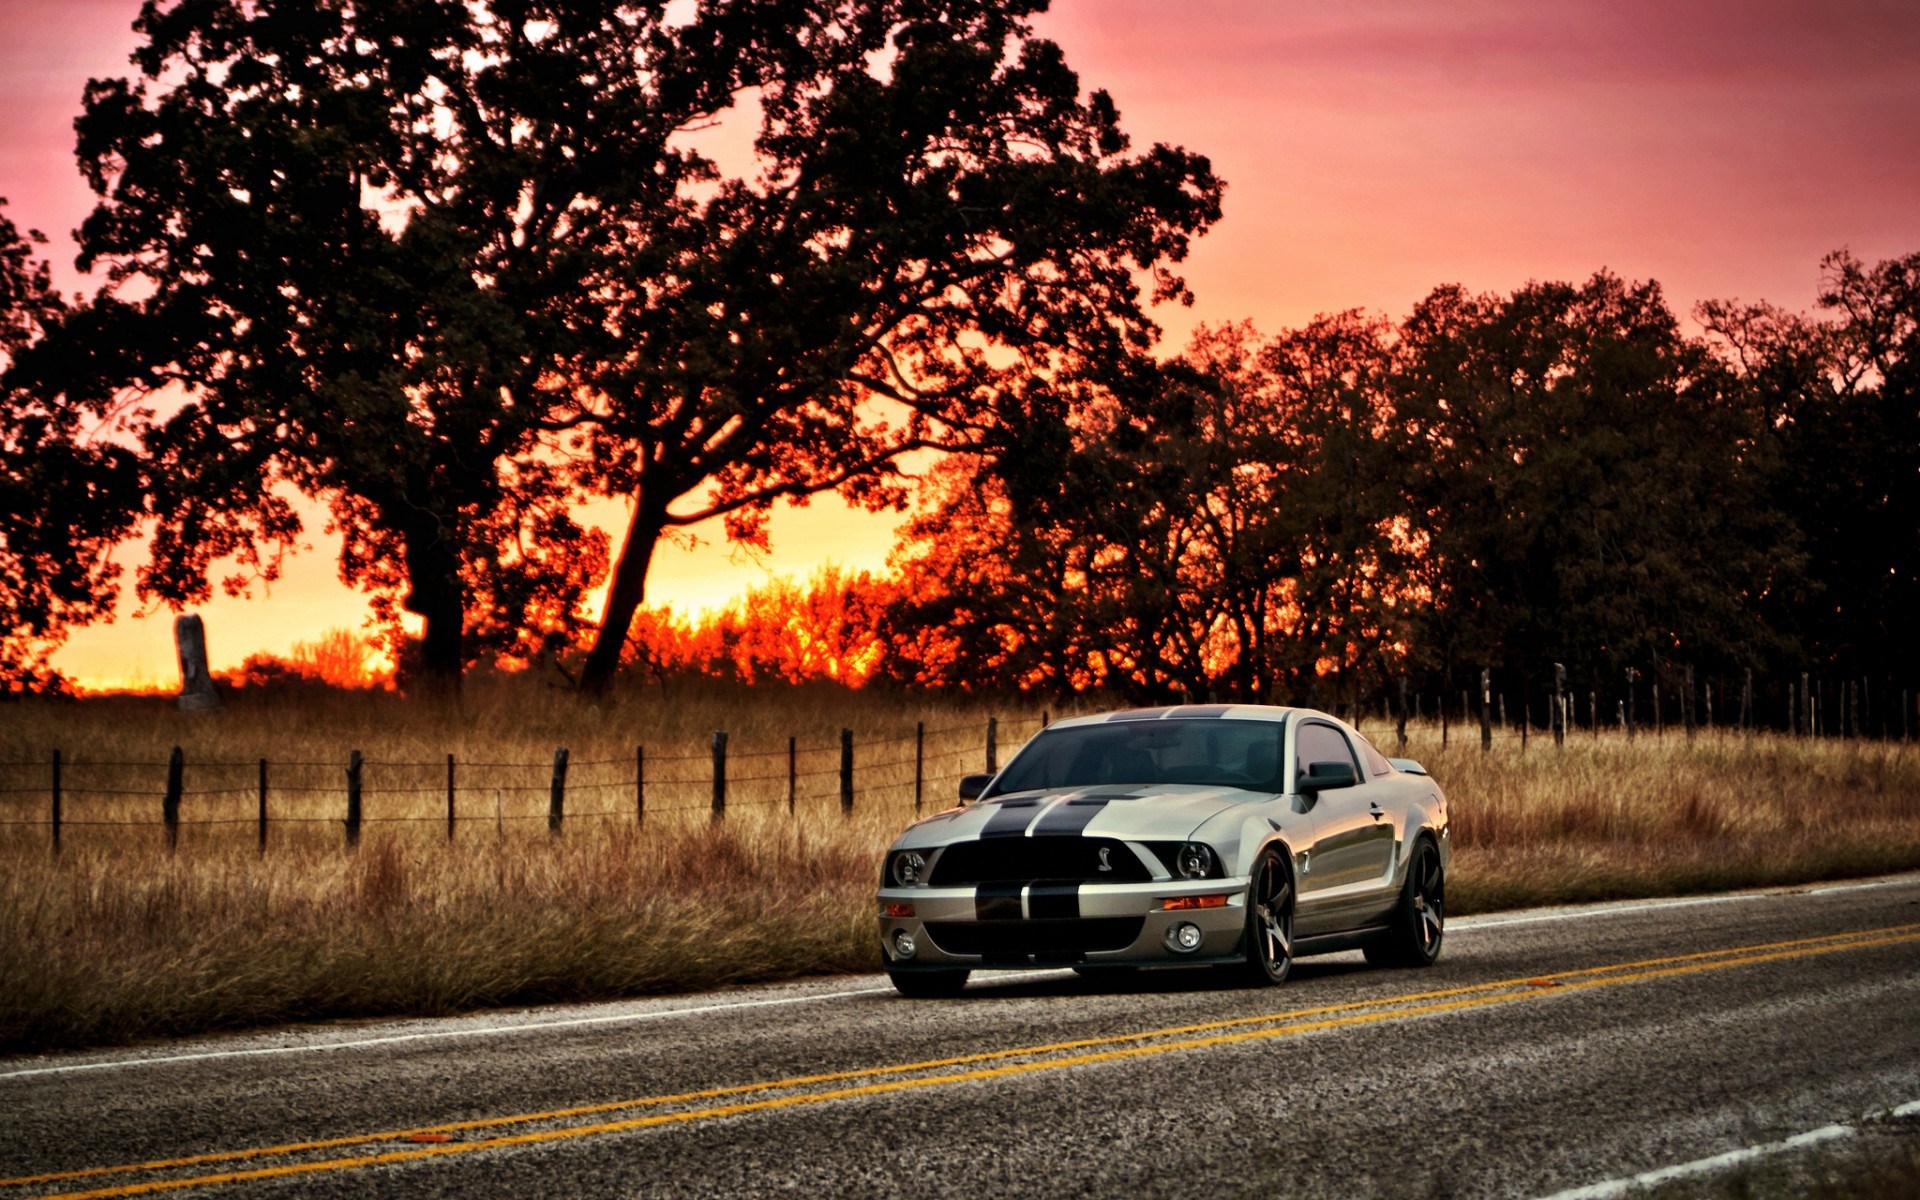 Ford Mustang Sunset Wallpaper HD